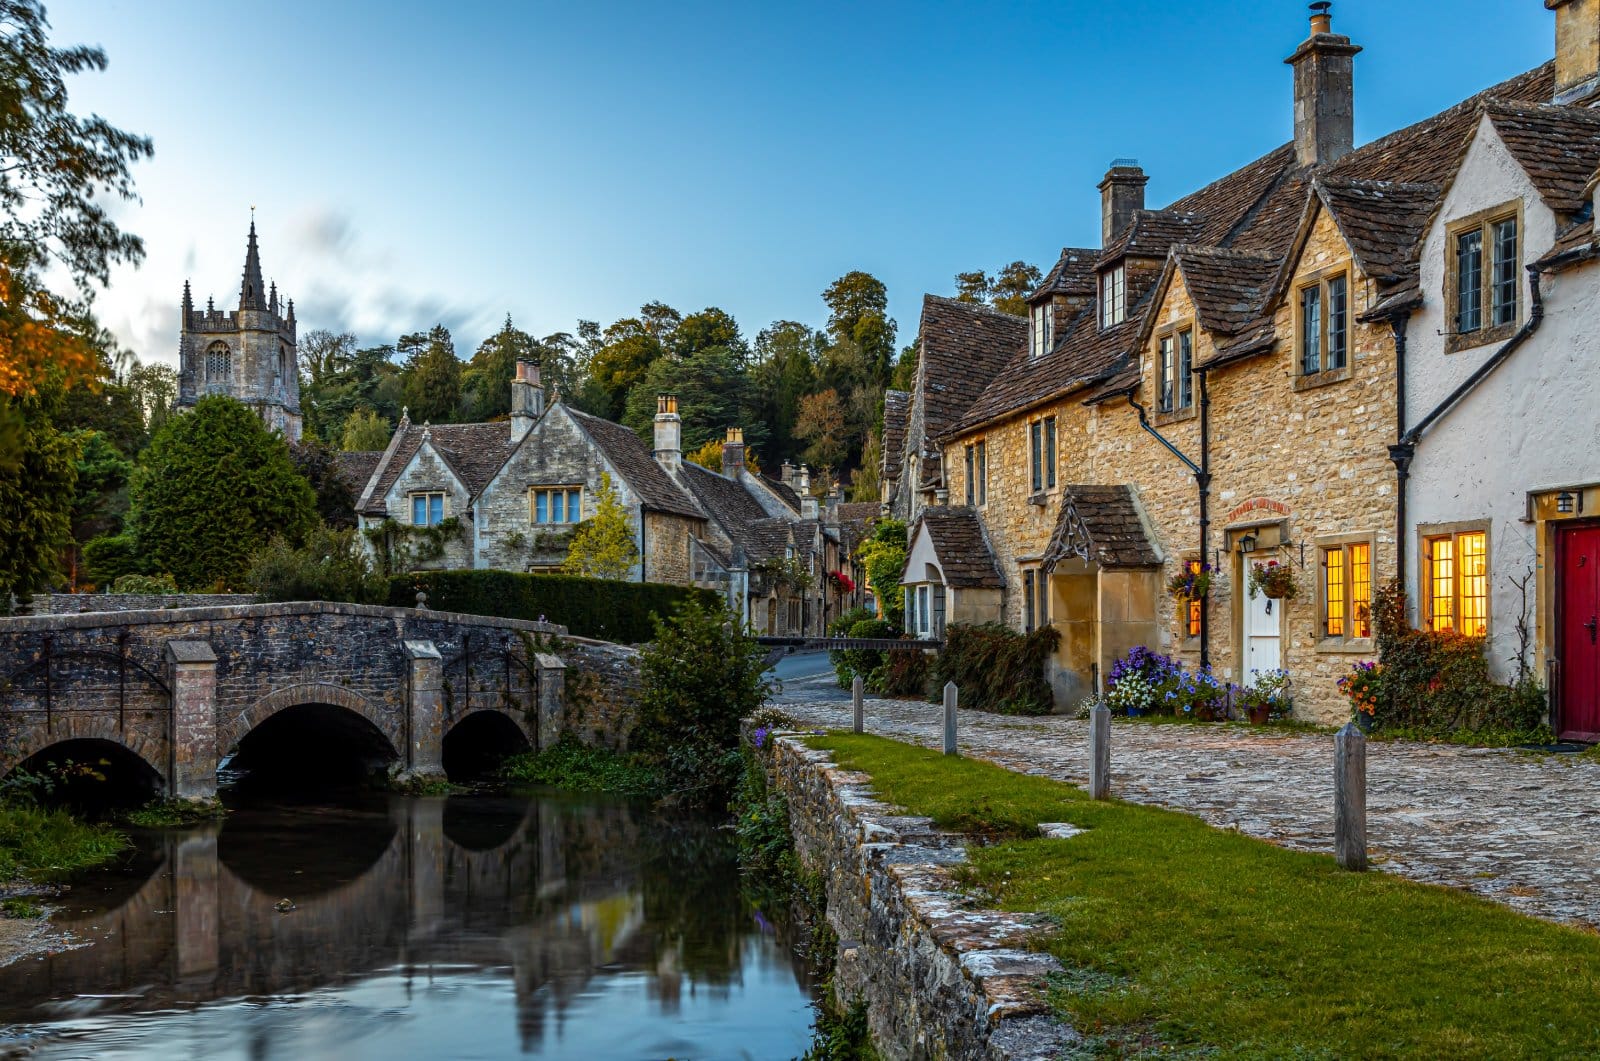 Image Credit: Shutterstock / Alexey Fedorenko <p>Castle Combe in the Cotswolds is often touted as England’s prettiest village. It’s an idyllic spot for photos, but the influx of Instagrammers can detract from its peaceful allure.</p>